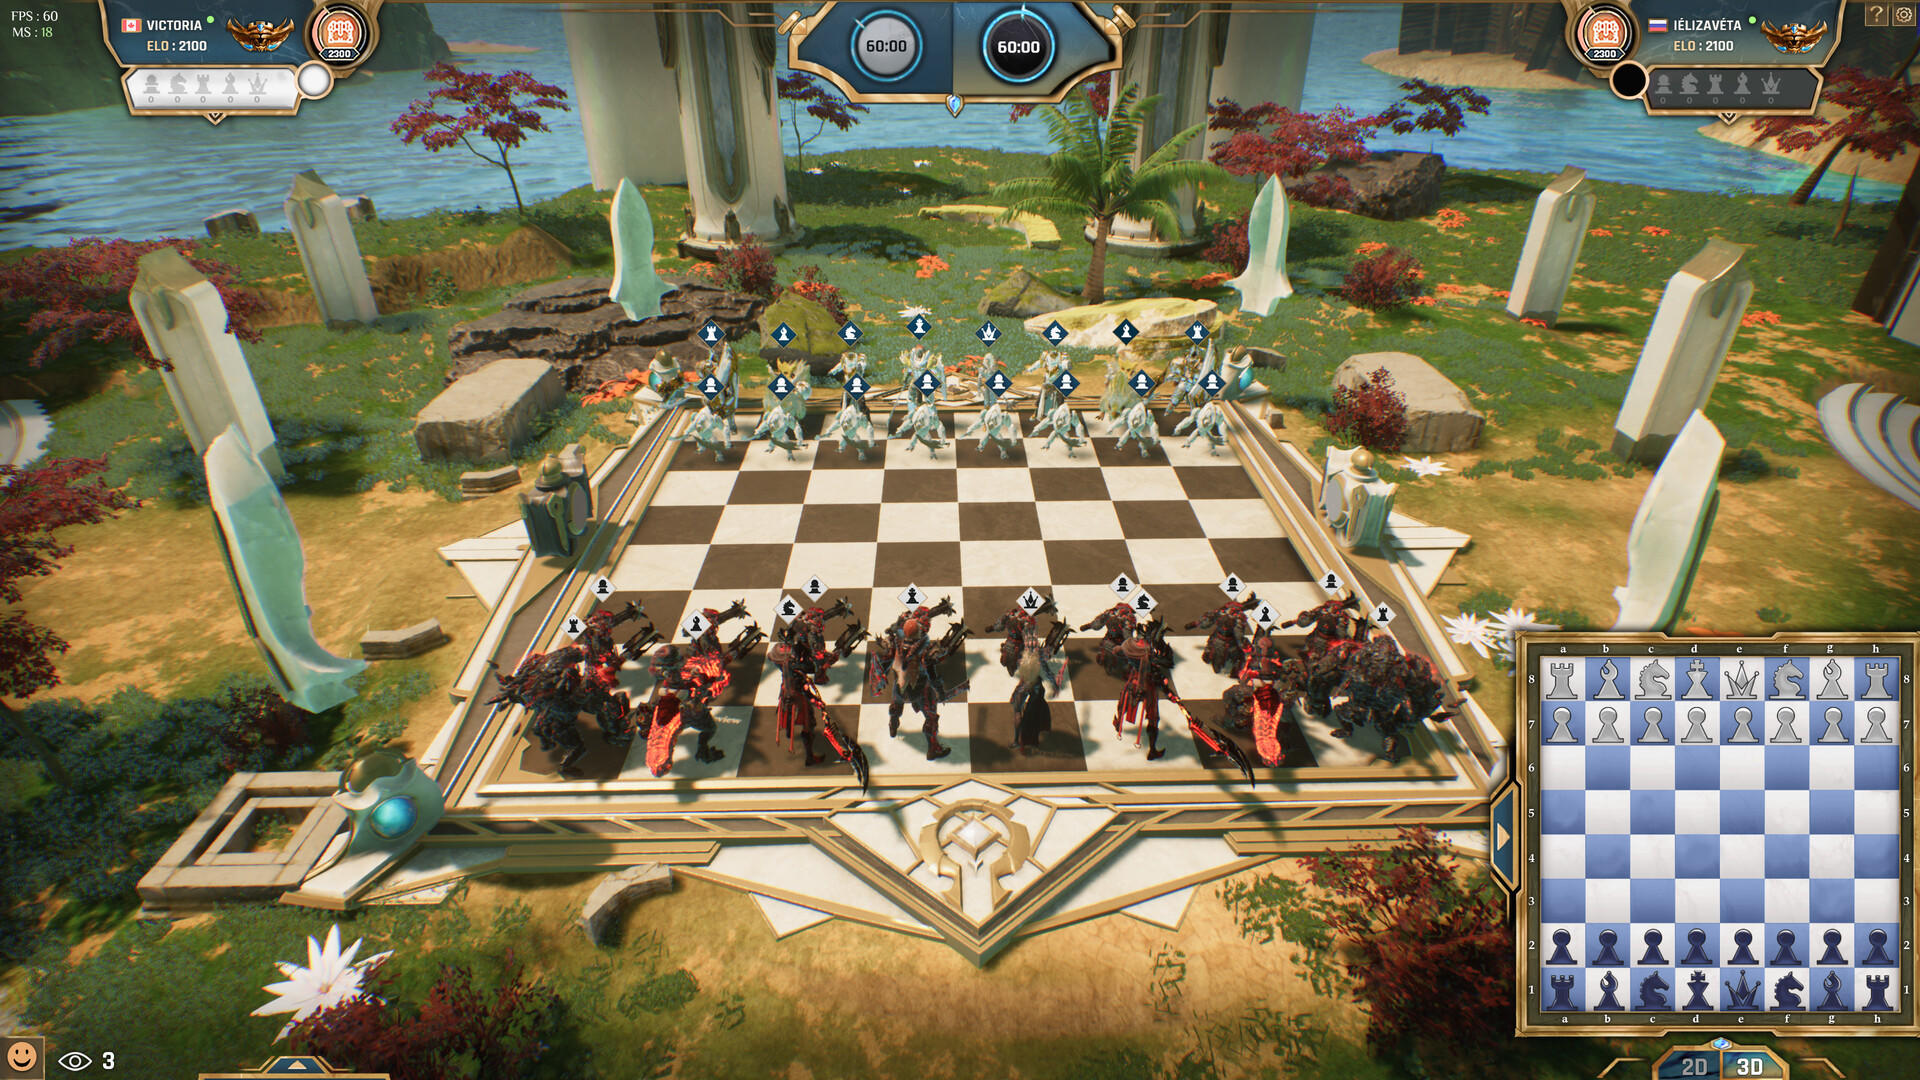 FPS Chess Gameplay HD (PC)